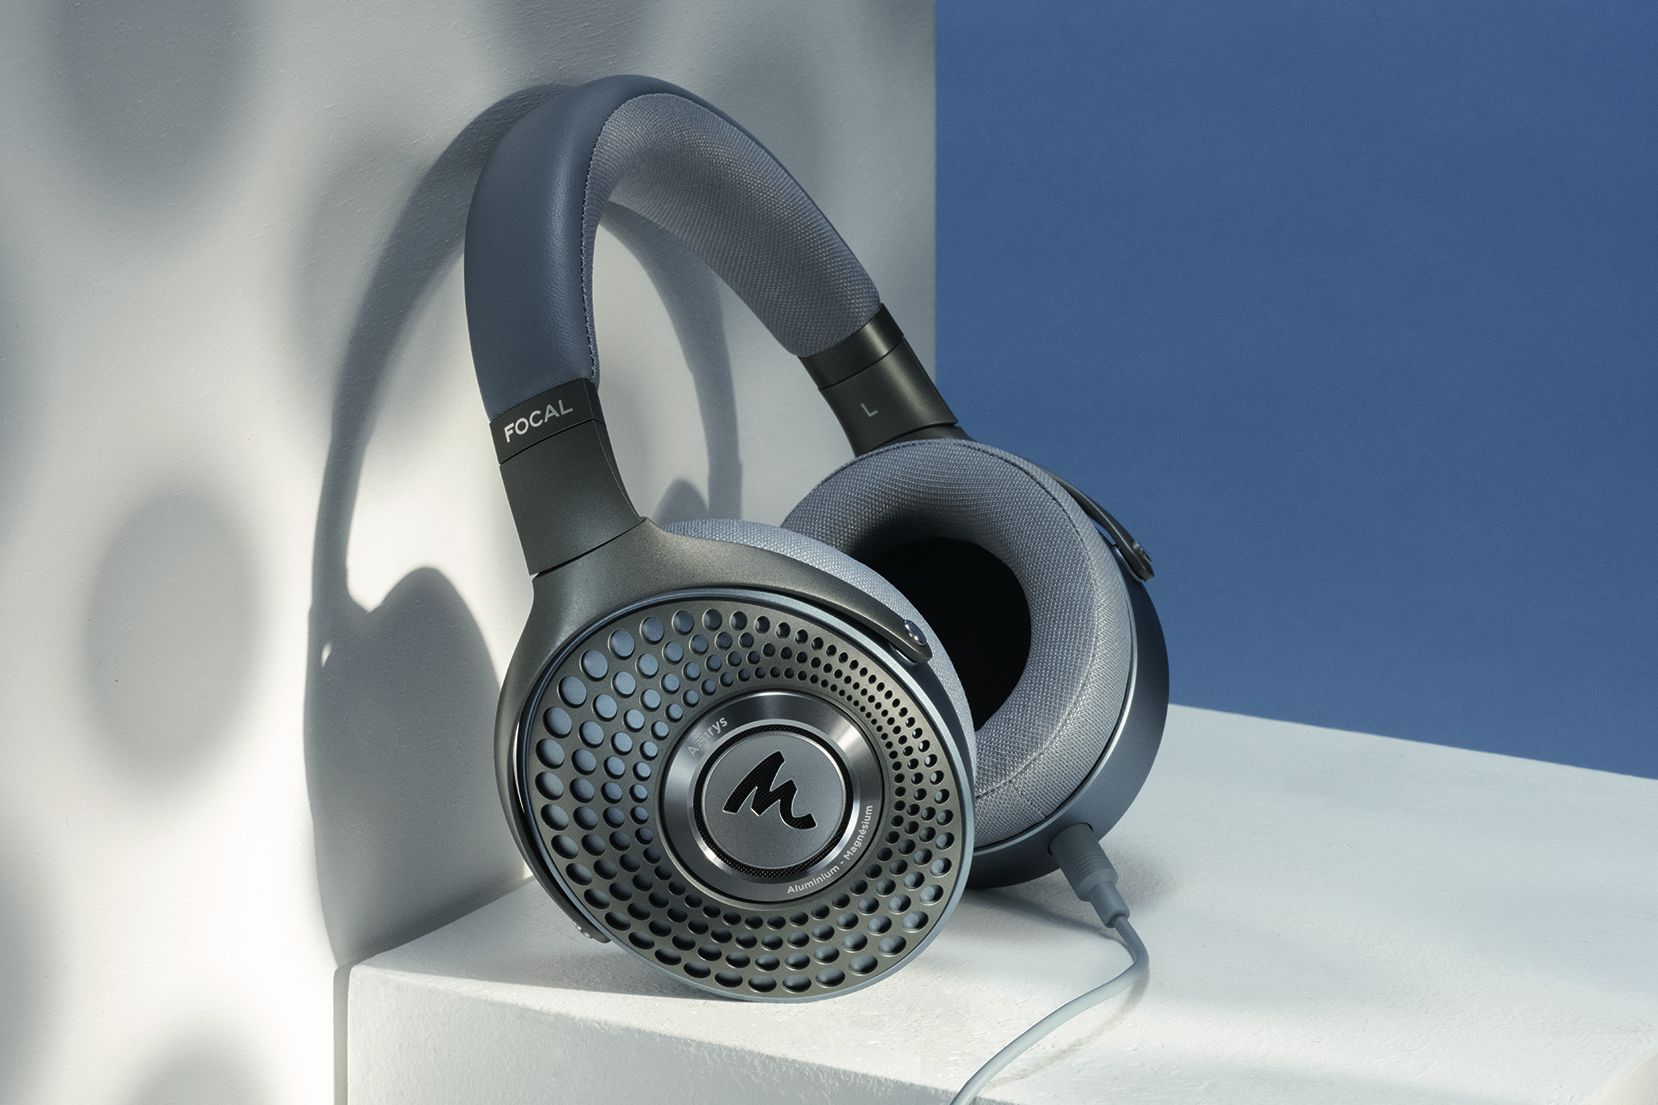 Focal Azurys wired closed-back headphones.